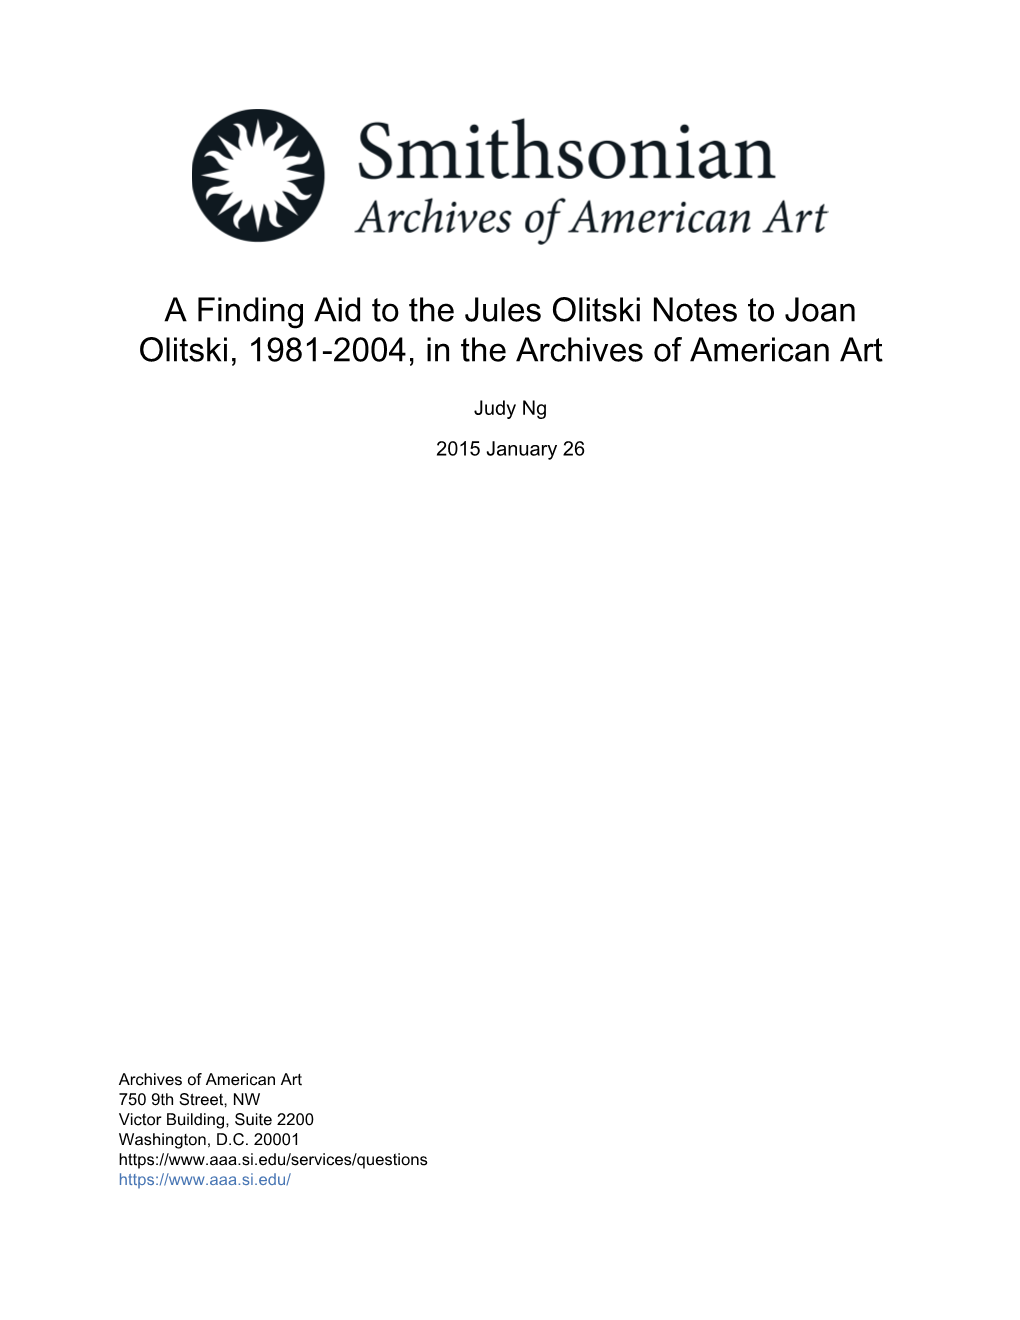 A Finding Aid to the Jules Olitski Notes to Joan Olitski, 1981-2004, in the Archives of American Art